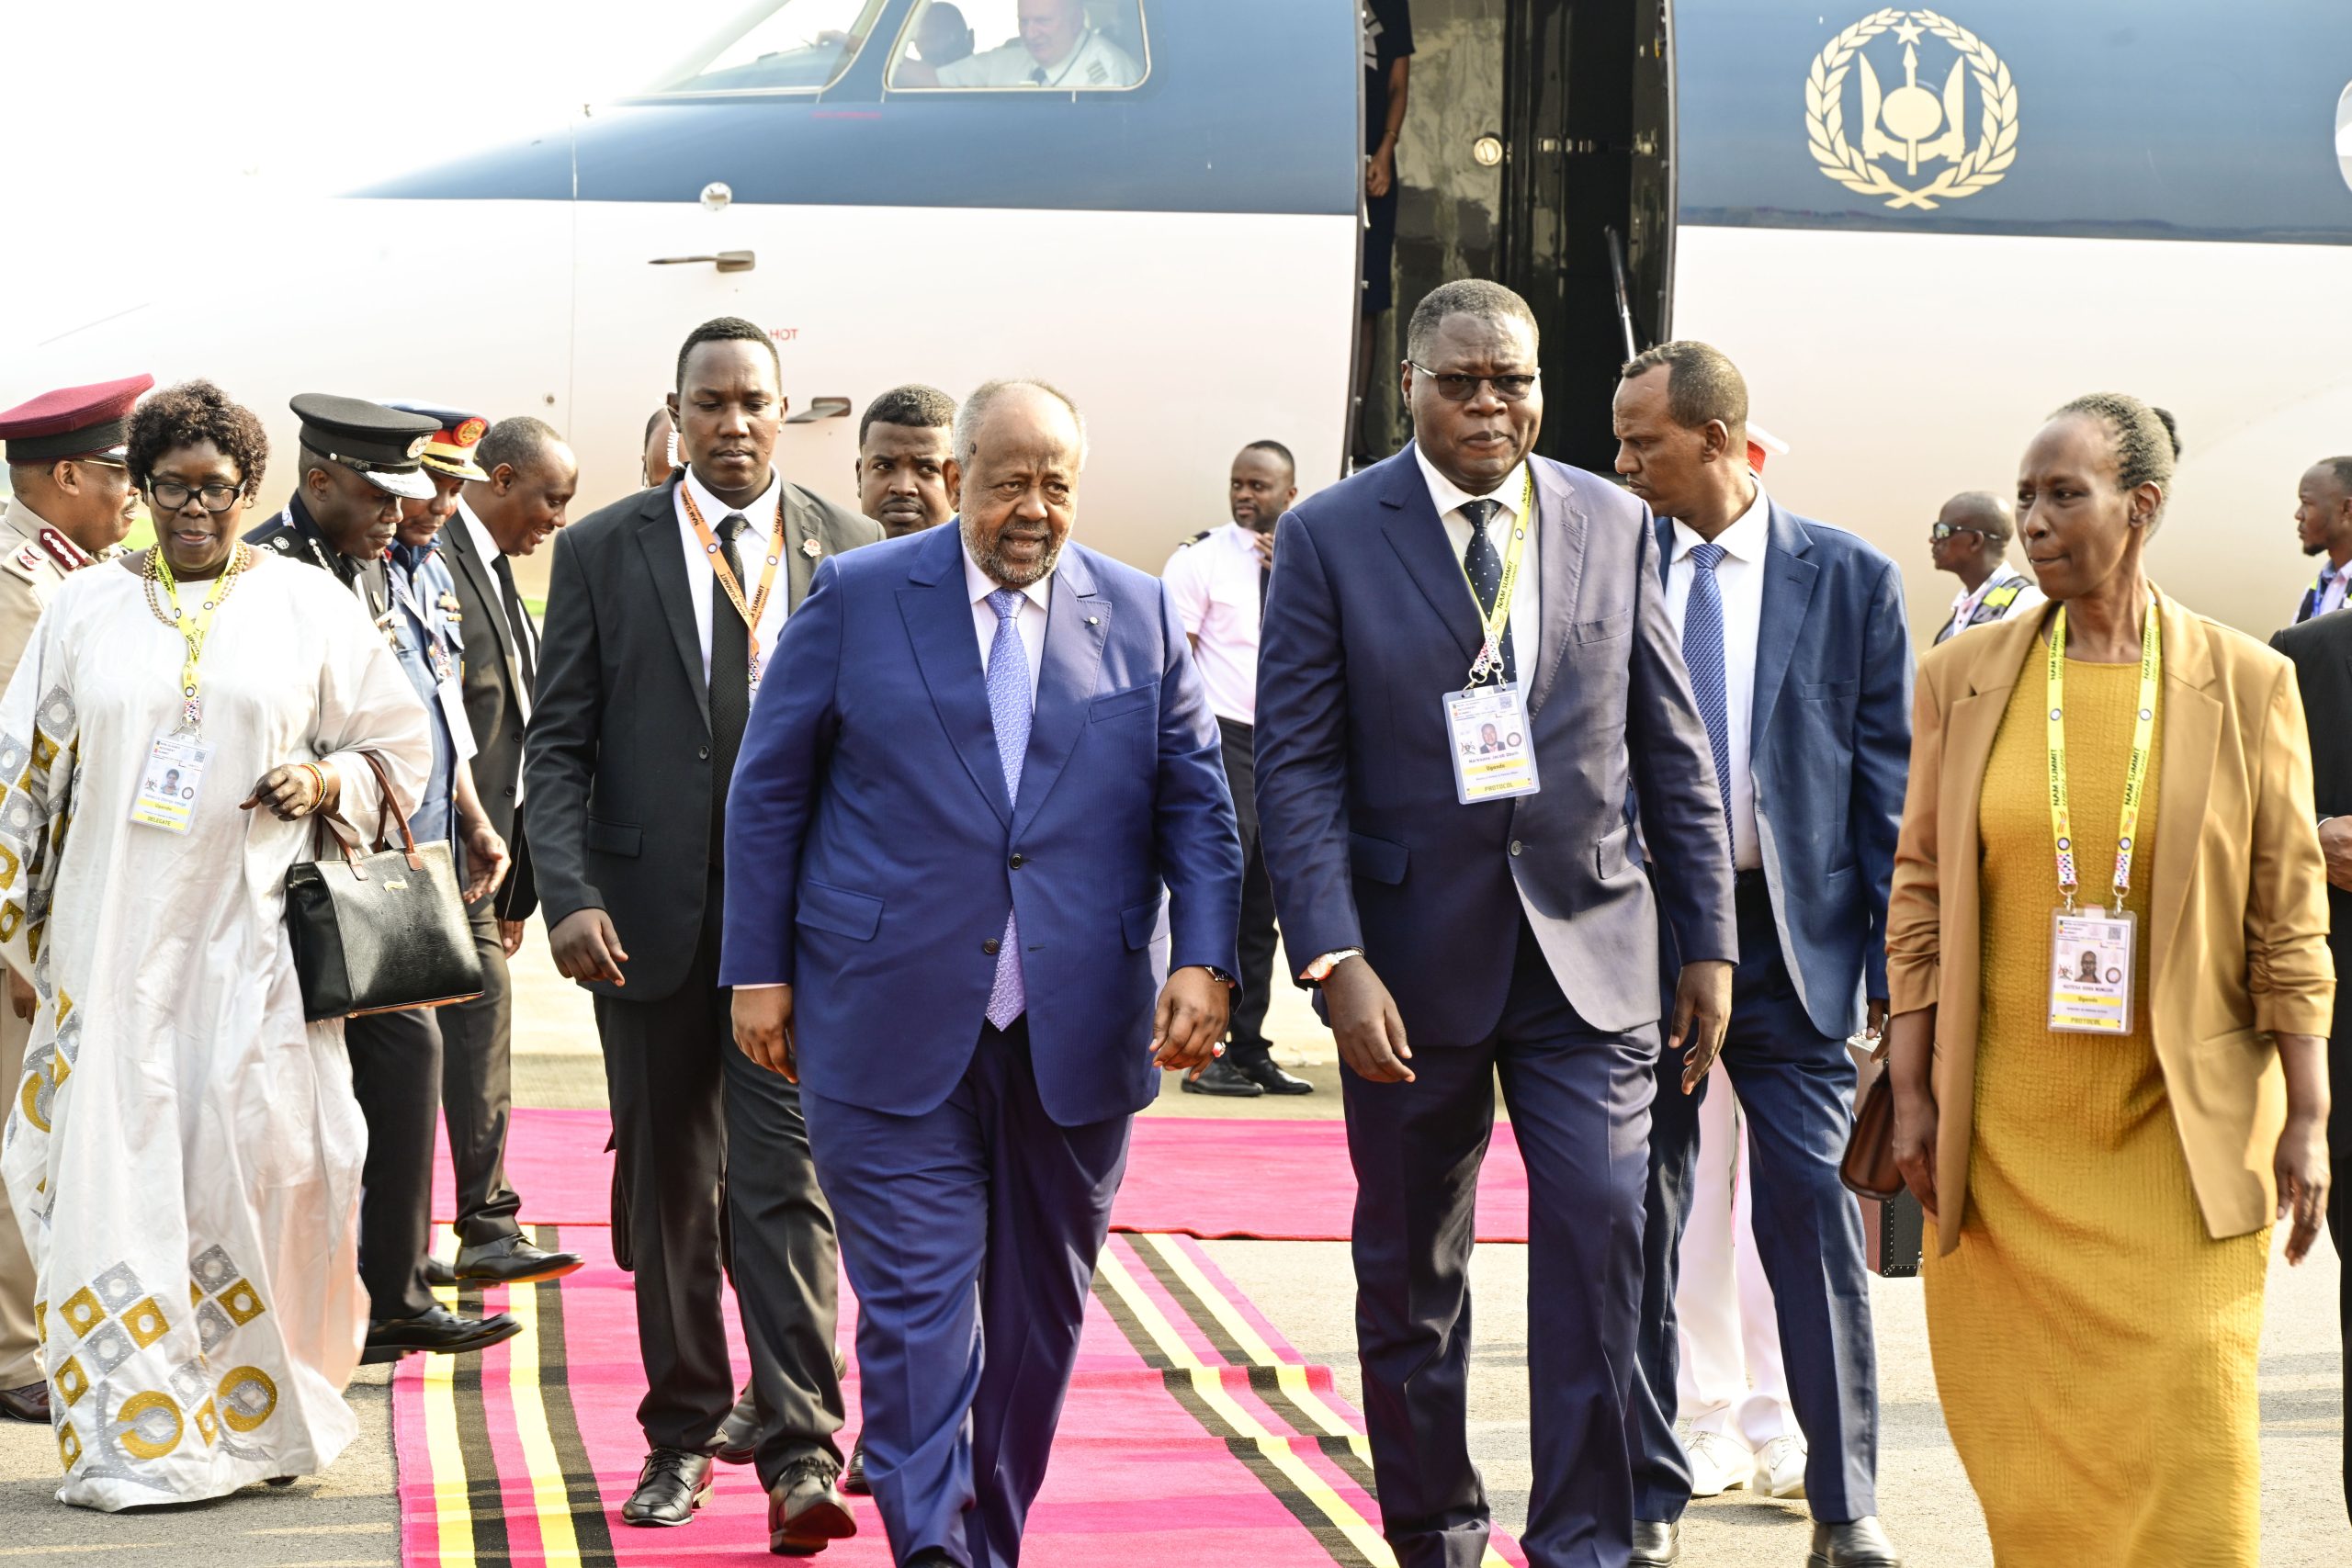 HEADS OF STATE ARRIVE IN UGANDA TO ATTEND IGAD AND NAM SUMMITS